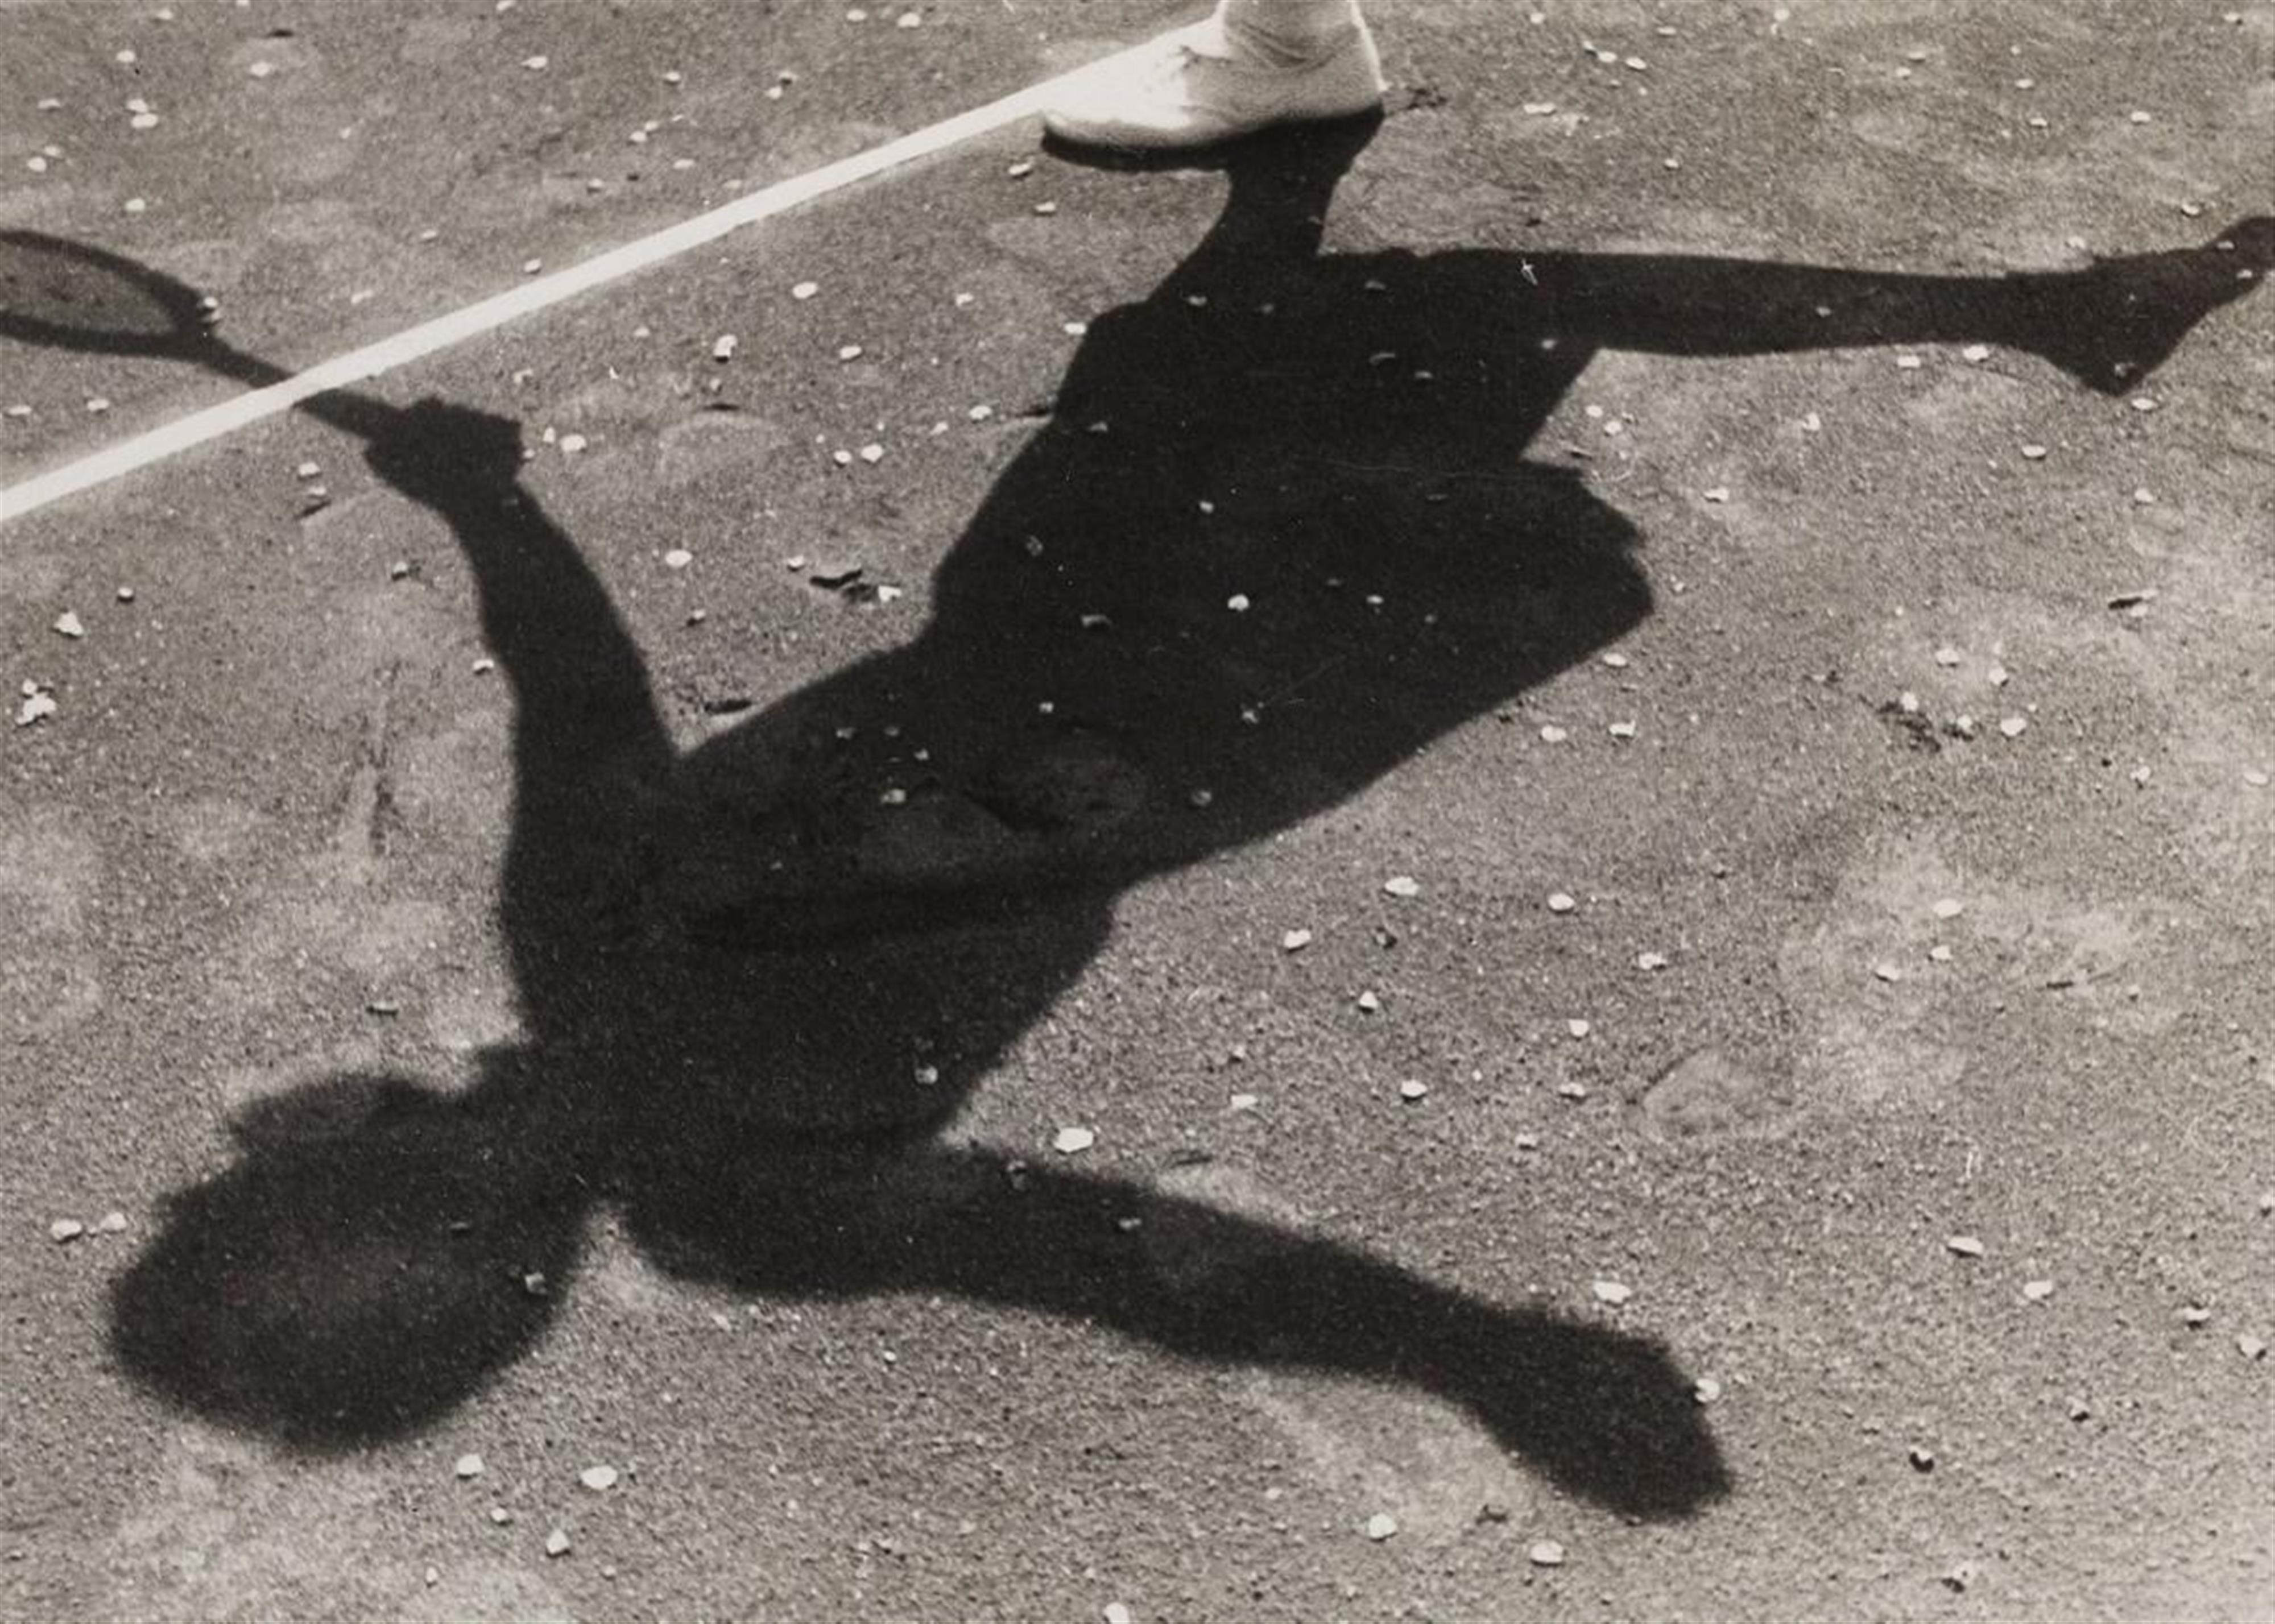 Dr. Paul Wolff
Alfred Tritschler - A ravishingly beautiful forehand volley looks also nice as a shadow - image-1